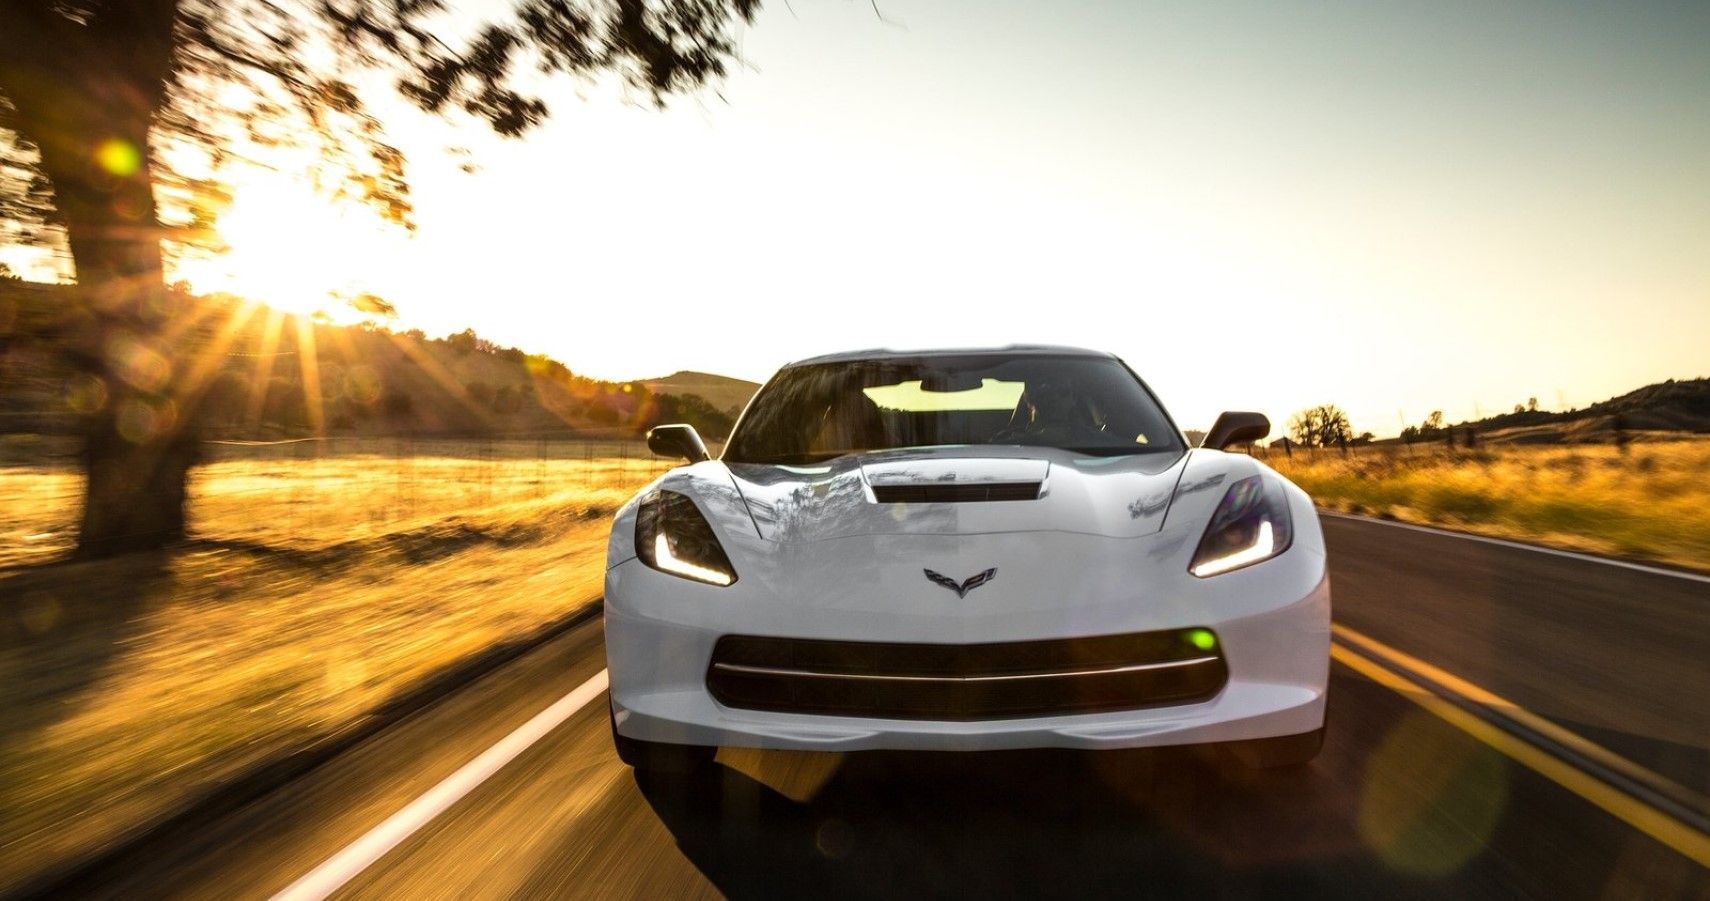 2014 Chevy Corvette C7 Stingray front accelerating view